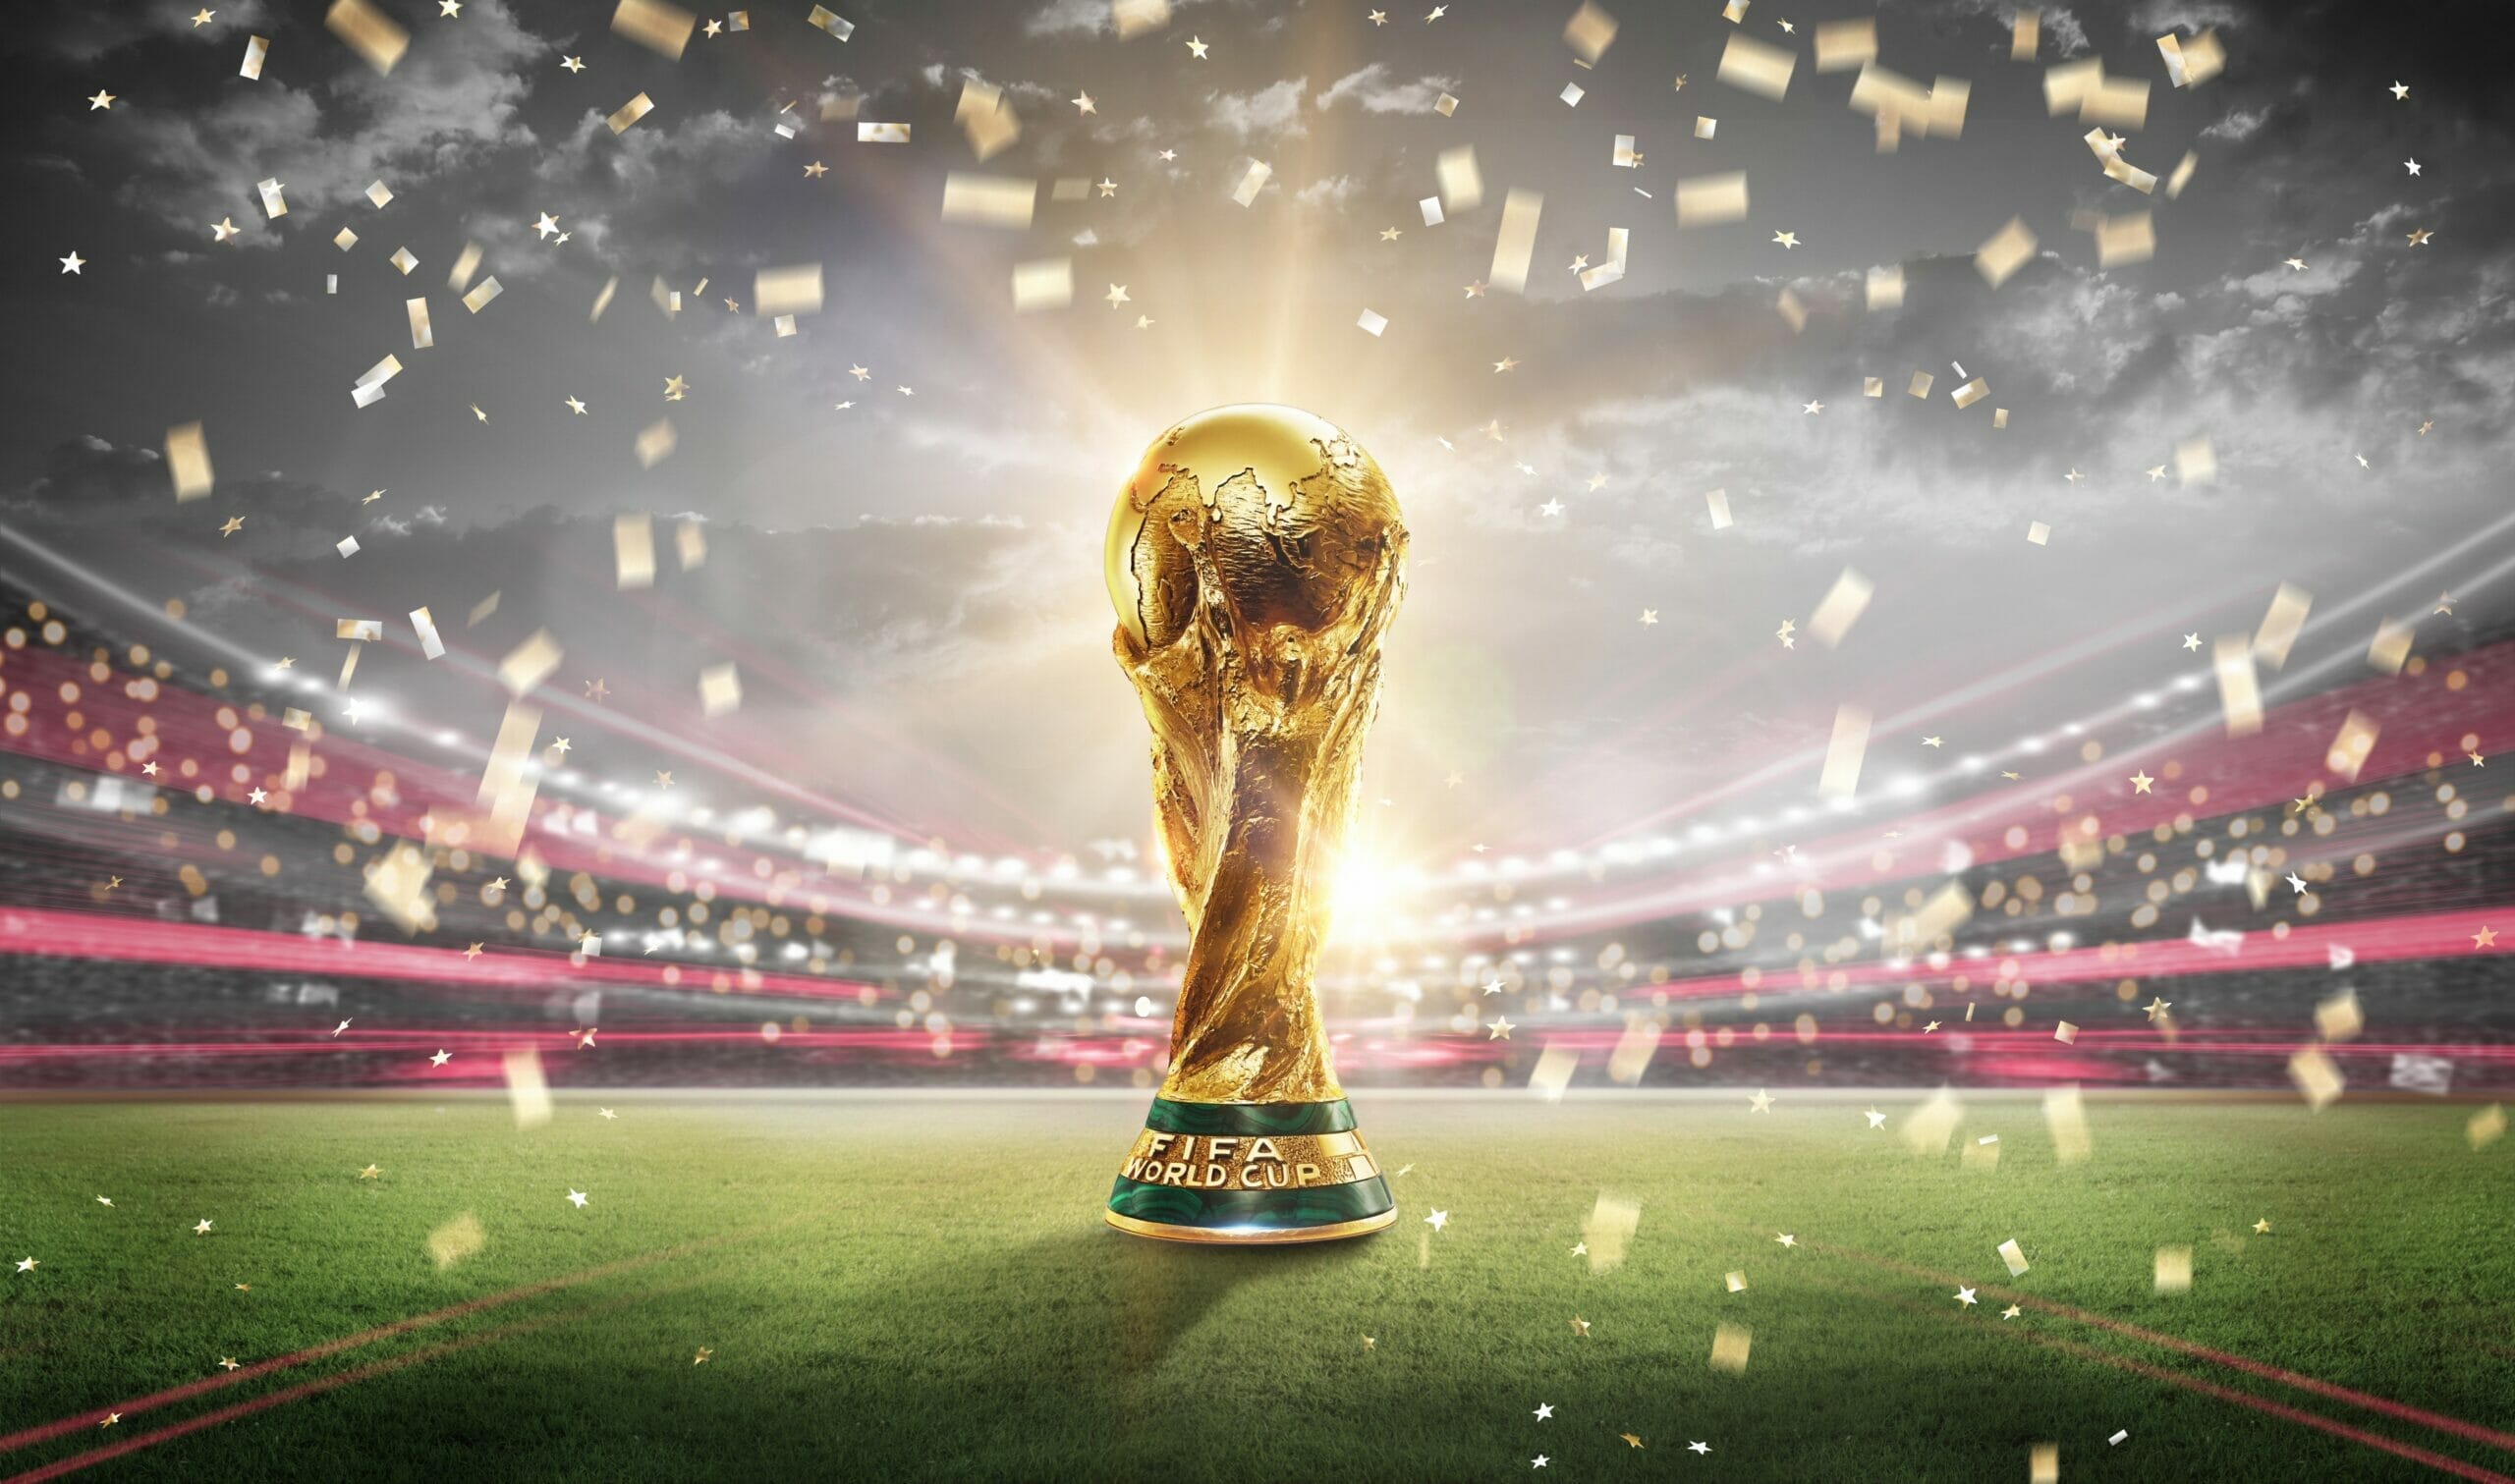 FIFA World Cup Qatar 2022 - Soccer Science |<img data-img-src='https://e2e85xpajrr.exactdn.com/wp-content/uploads/2022/09/01180504/shutterstock_2190840355-scaled.jpg?strip=all&lossy=1&ssl=1' alt='Who scored the first goal in World Cup history' />|<img data-img-src='https://e2e85xpajrr.exactdn.com/wp-content/uploads/2022/09/01180504/shutterstock_2190840355-scaled.jpg?strip=all&lossy=1&ssl=1' alt='Who scored the first goal in World Cup history' /><p>Lucien Laurent impacted the world forever through scoring the competition's most memorable goal inside the nineteenth moment of the fit, giving France a 1-0 lead over Mexico. Laurent's point changed into a broad second, as of now not the best in World Cup records anyway, likewise inside the development of overall football. It denoted the beginning of what might develop into the most extreme and generally watched donning event inside the world.</p><p>In spite of Laurent's old objective, the fit finished with a 4-1 victory for France. Nonetheless, the significance of his goal rises above the result of the suit, as it represents the introduction of a global football peculiarity that keeps up with to enthrall crowds across mainlands right up until now.</p><p><a href=